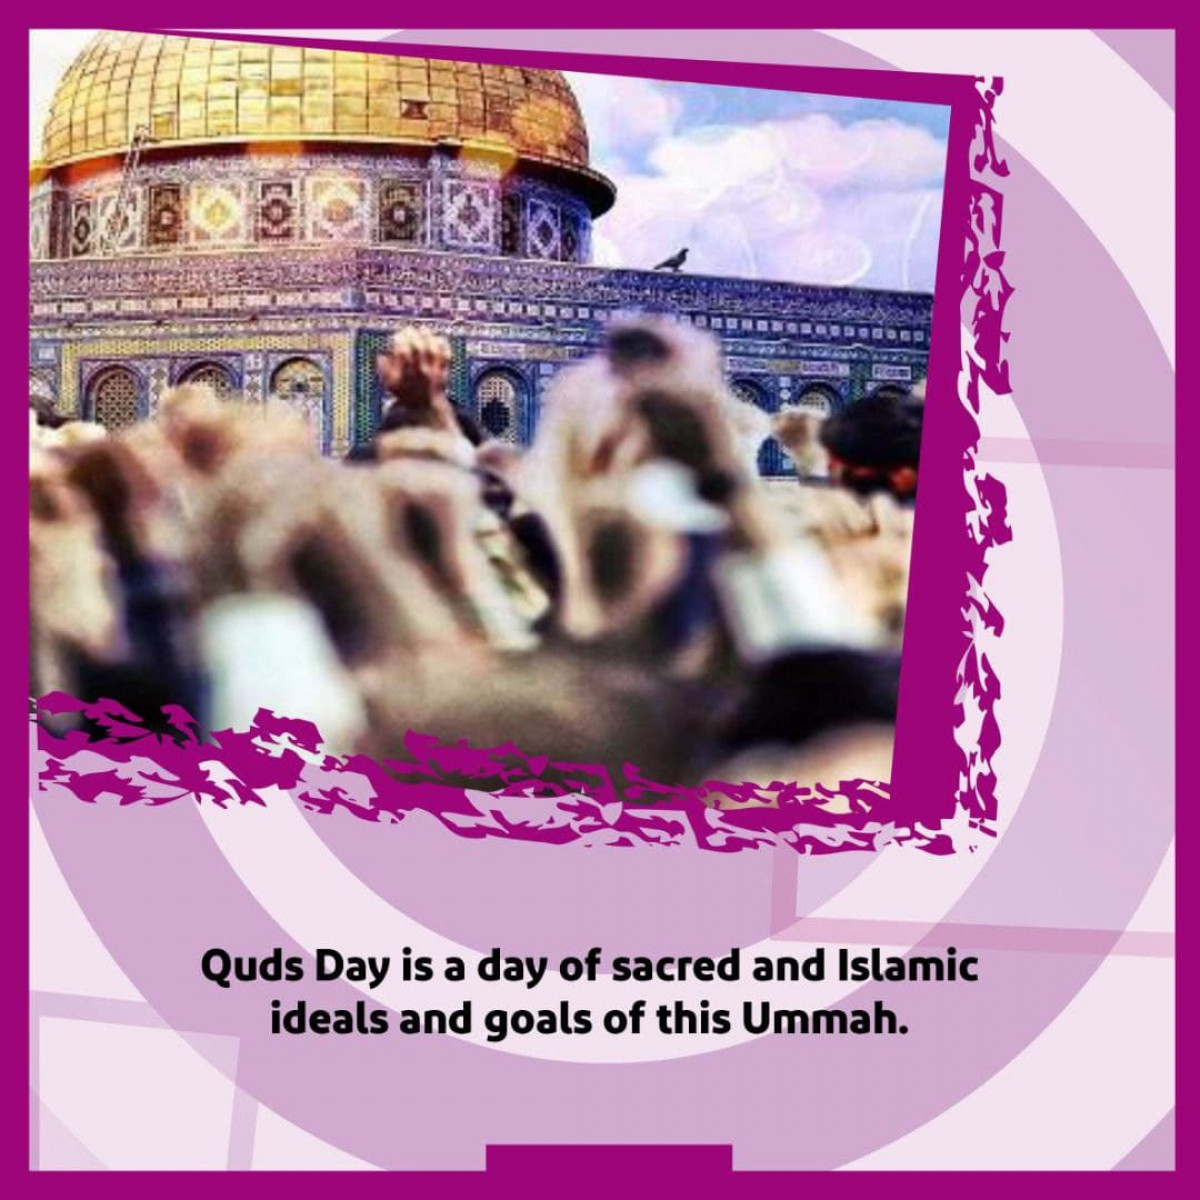 Quds Day is a day of sacred and Islamic ideals and goals of this Ummah